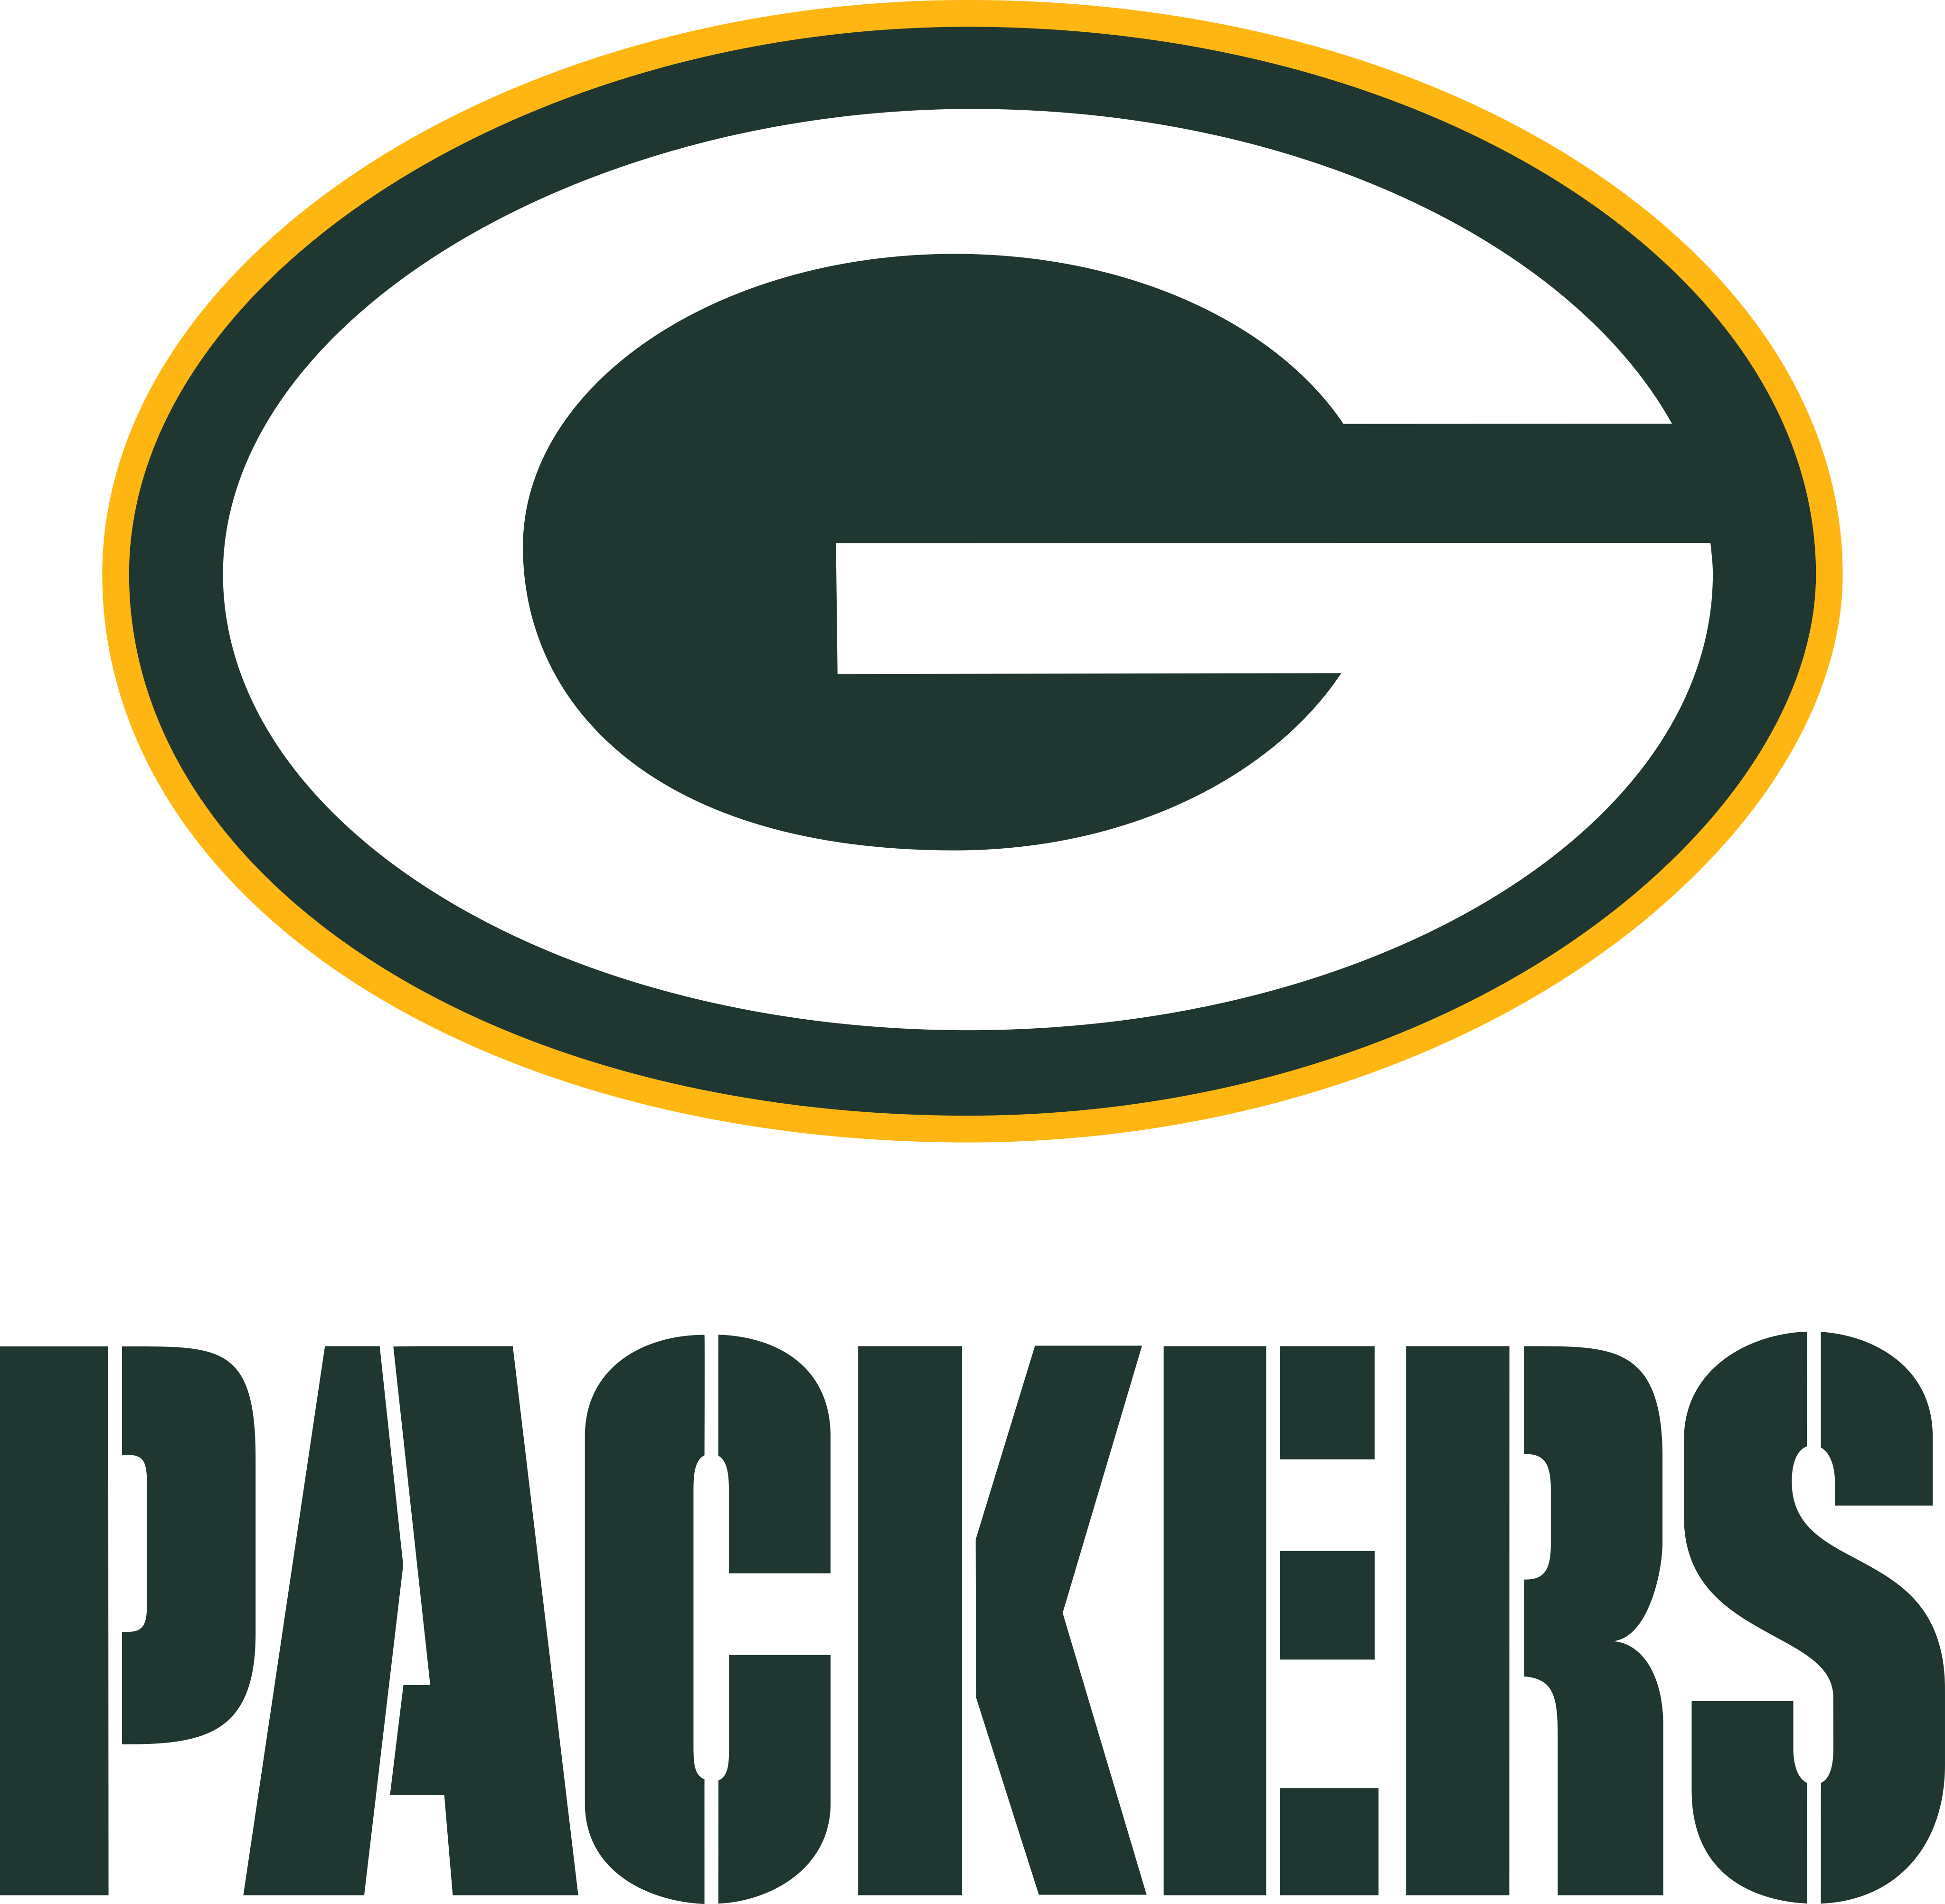 Green Bay Packers Free PNG Image